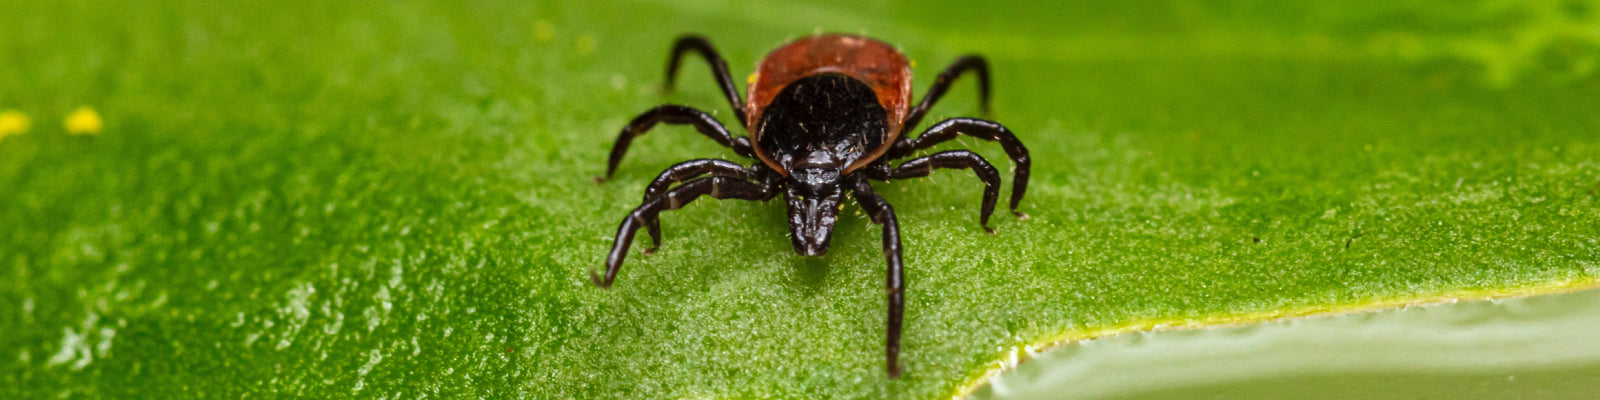 Close up of black and red tick on a leaf